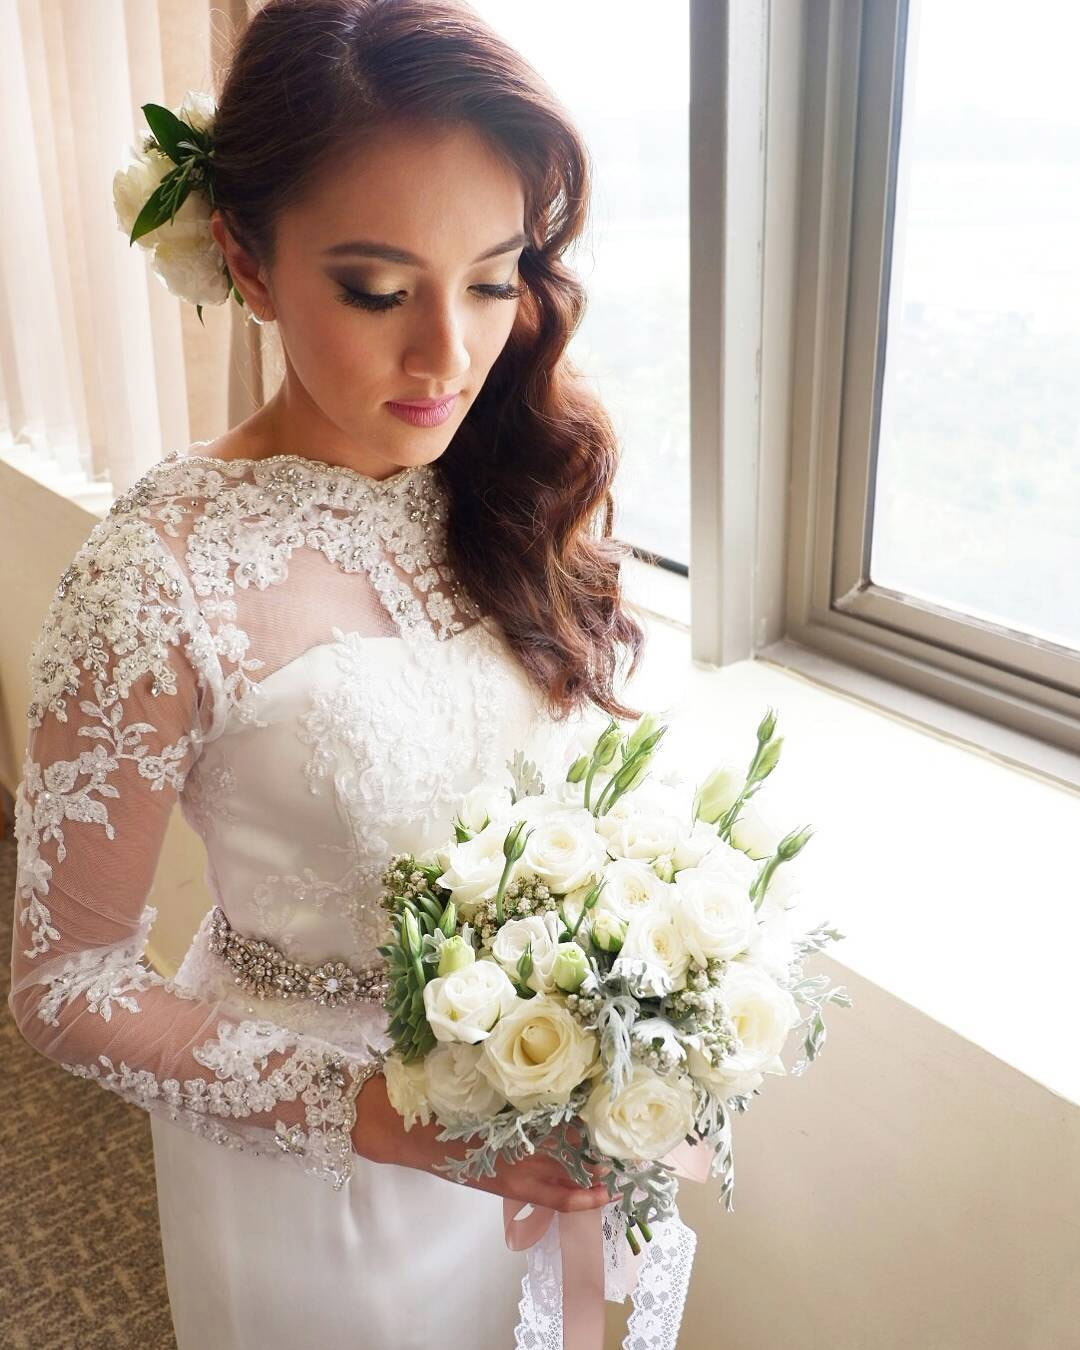 5 Bridal Makeup Styles to Look Your Best at Your Wedding